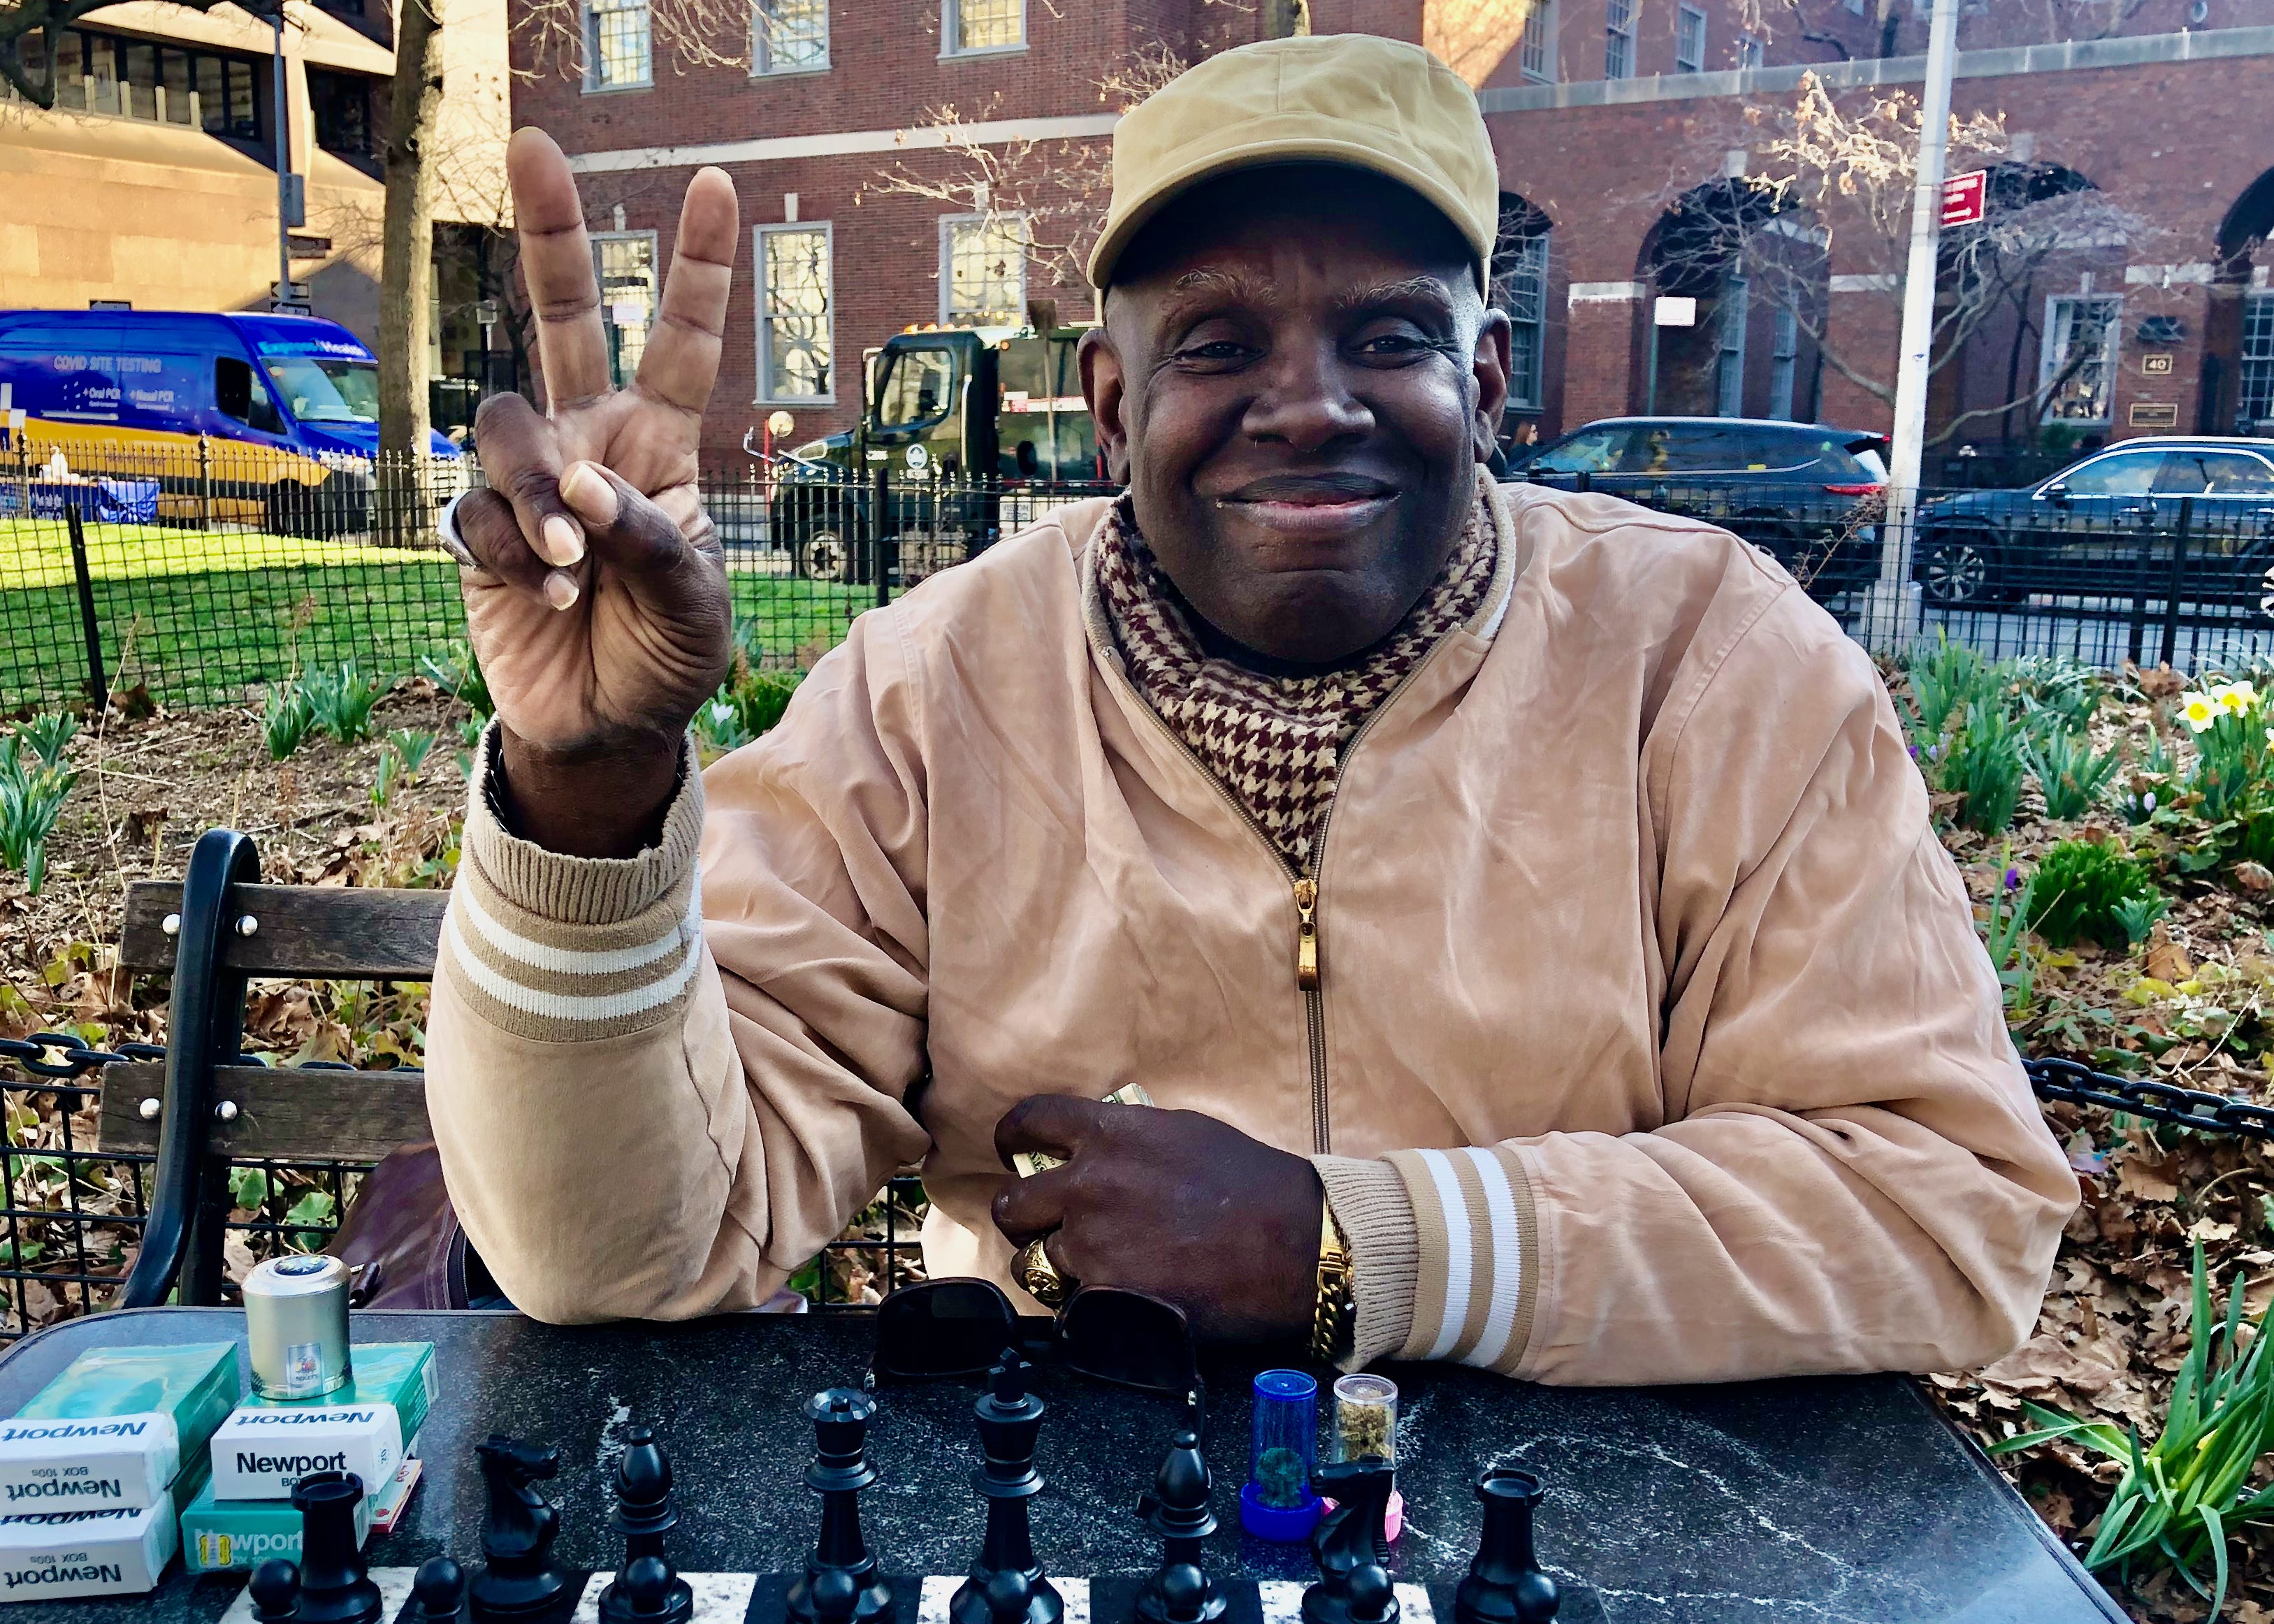 This is Robert. He plays chess in Washington Park. He is my first post on  Reddit.